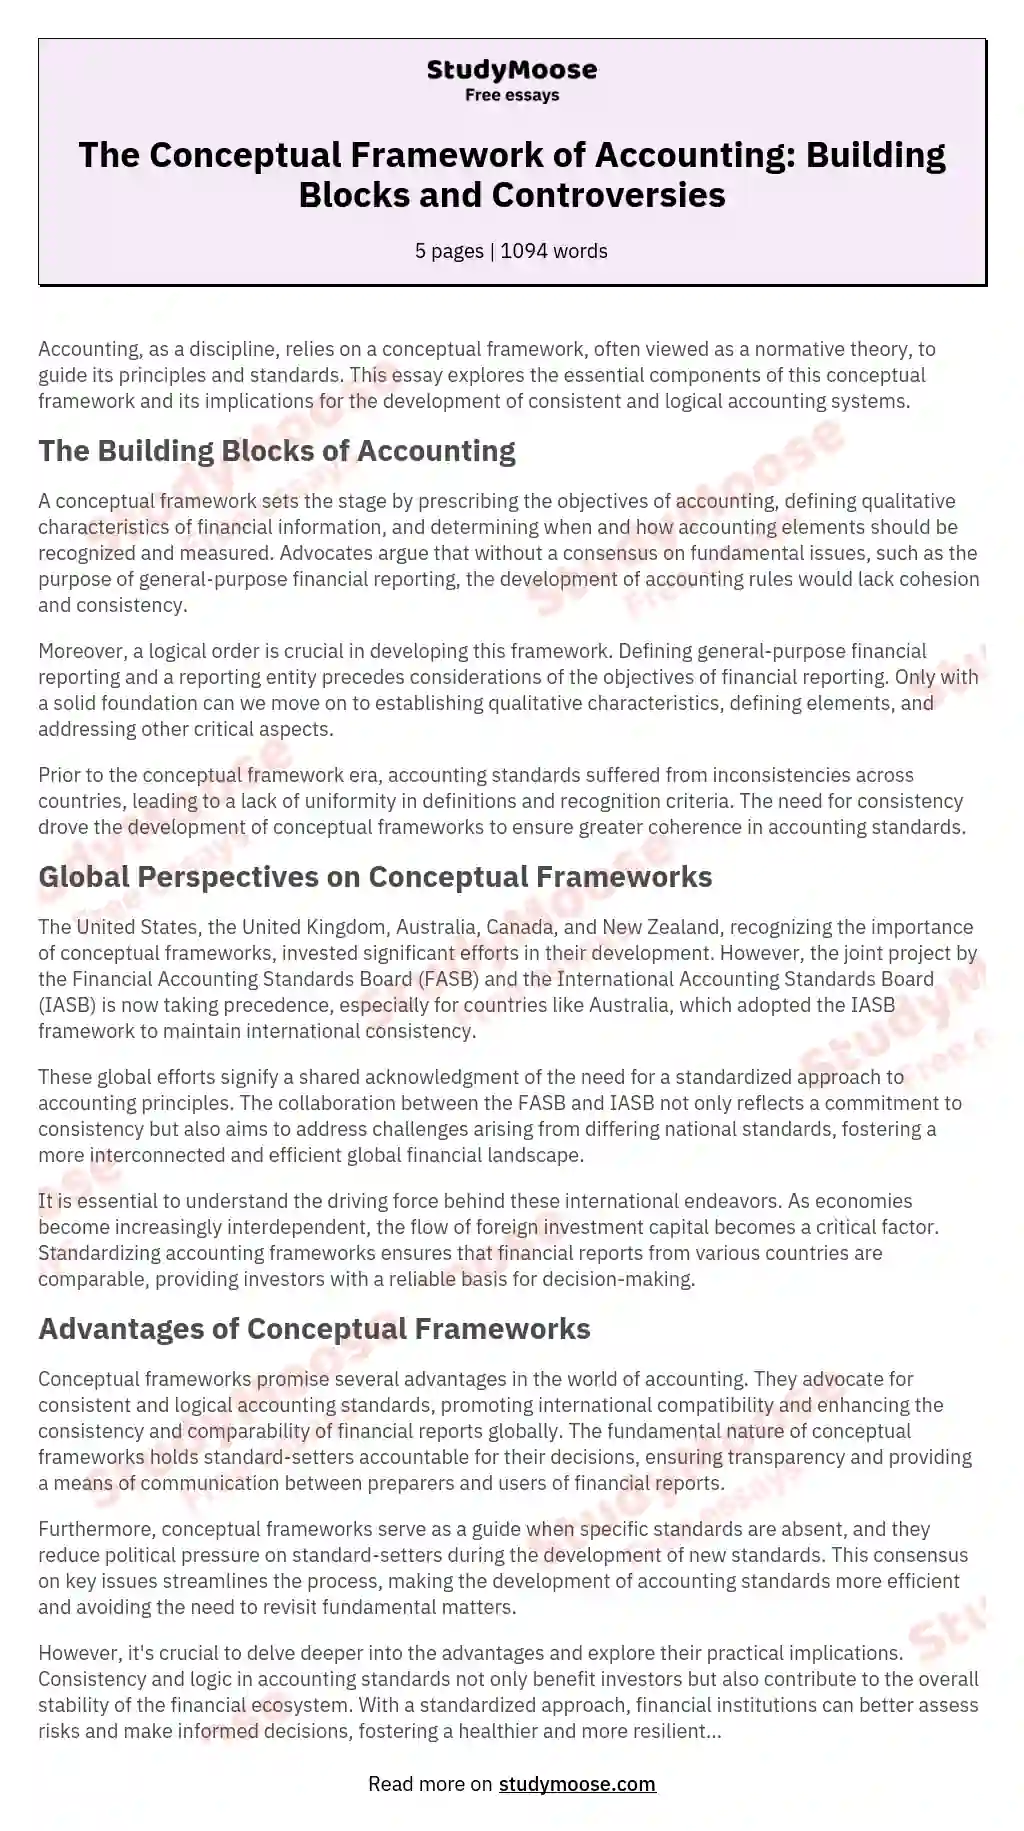 The Conceptual Framework of Accounting: Building Blocks and Controversies essay